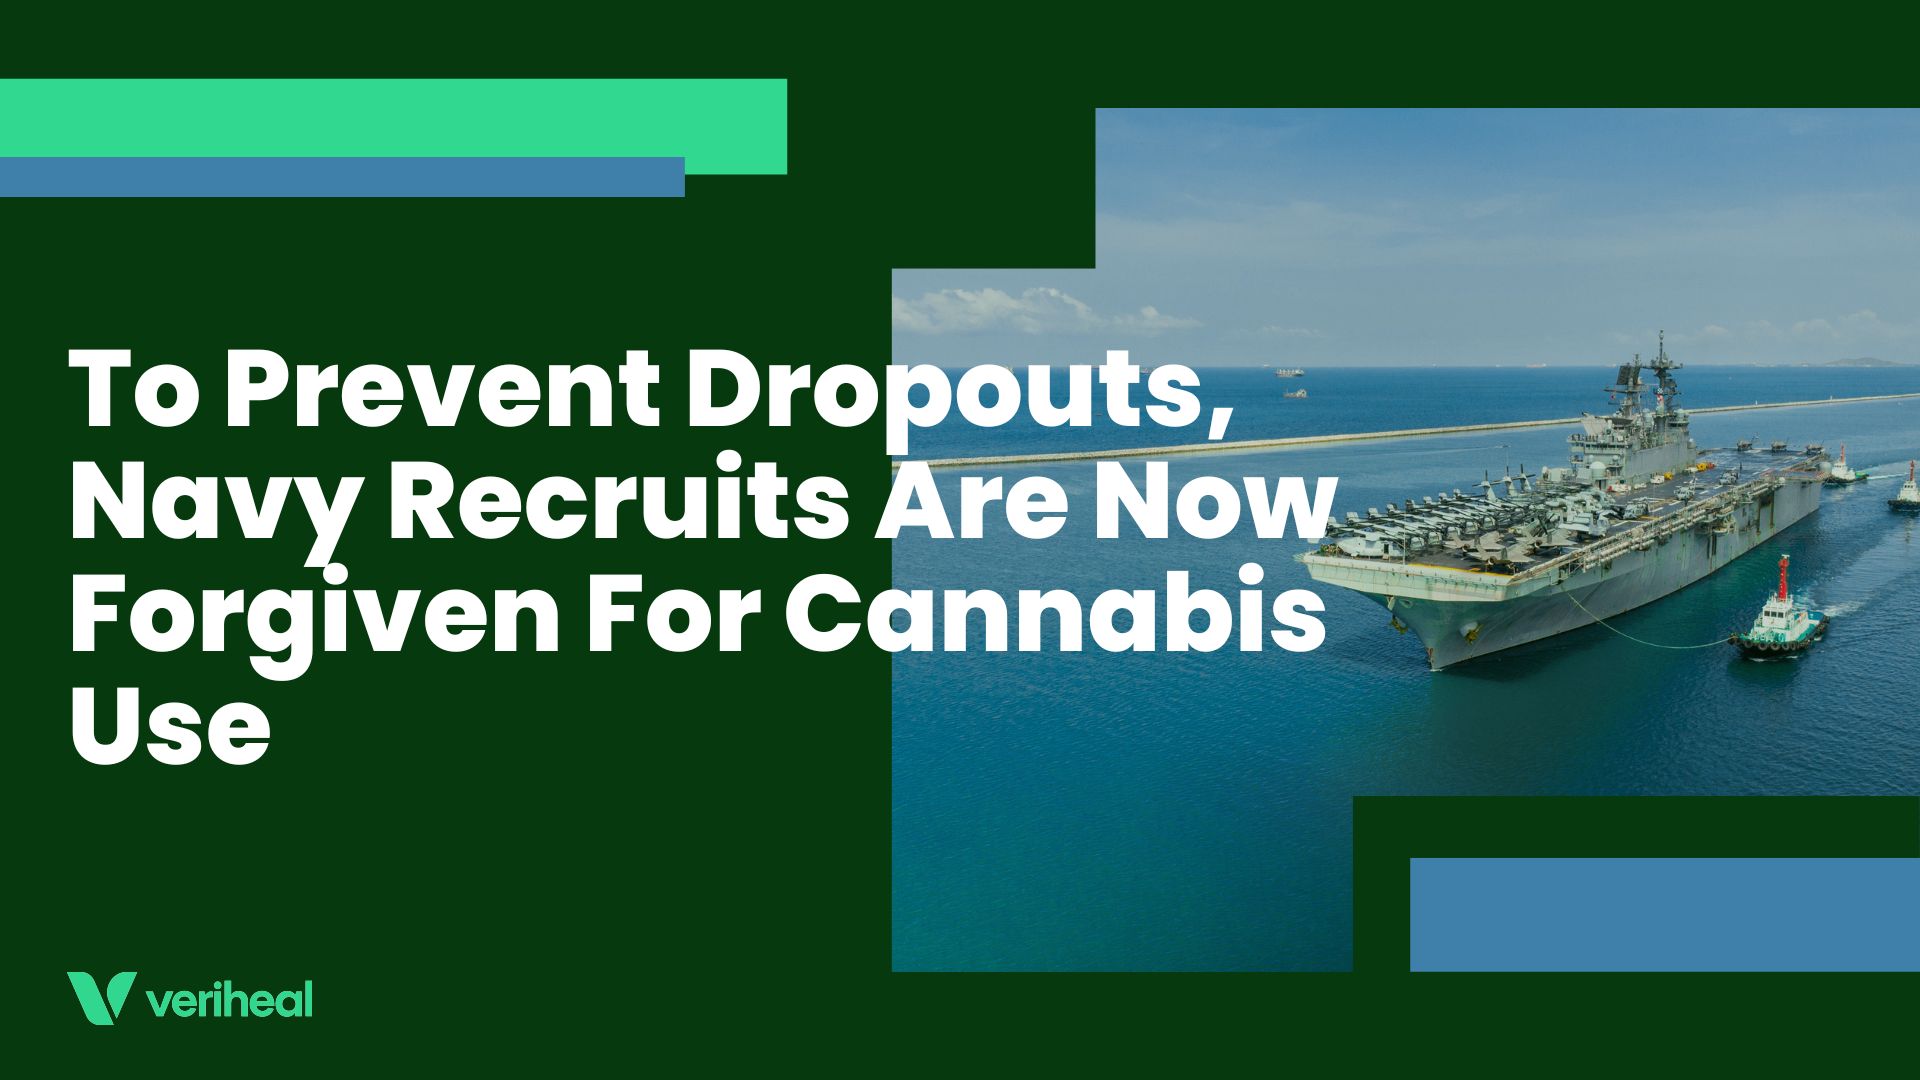 To Prevent Dropouts, Navy Recruits Are Now Forgiven For Cannabis Use